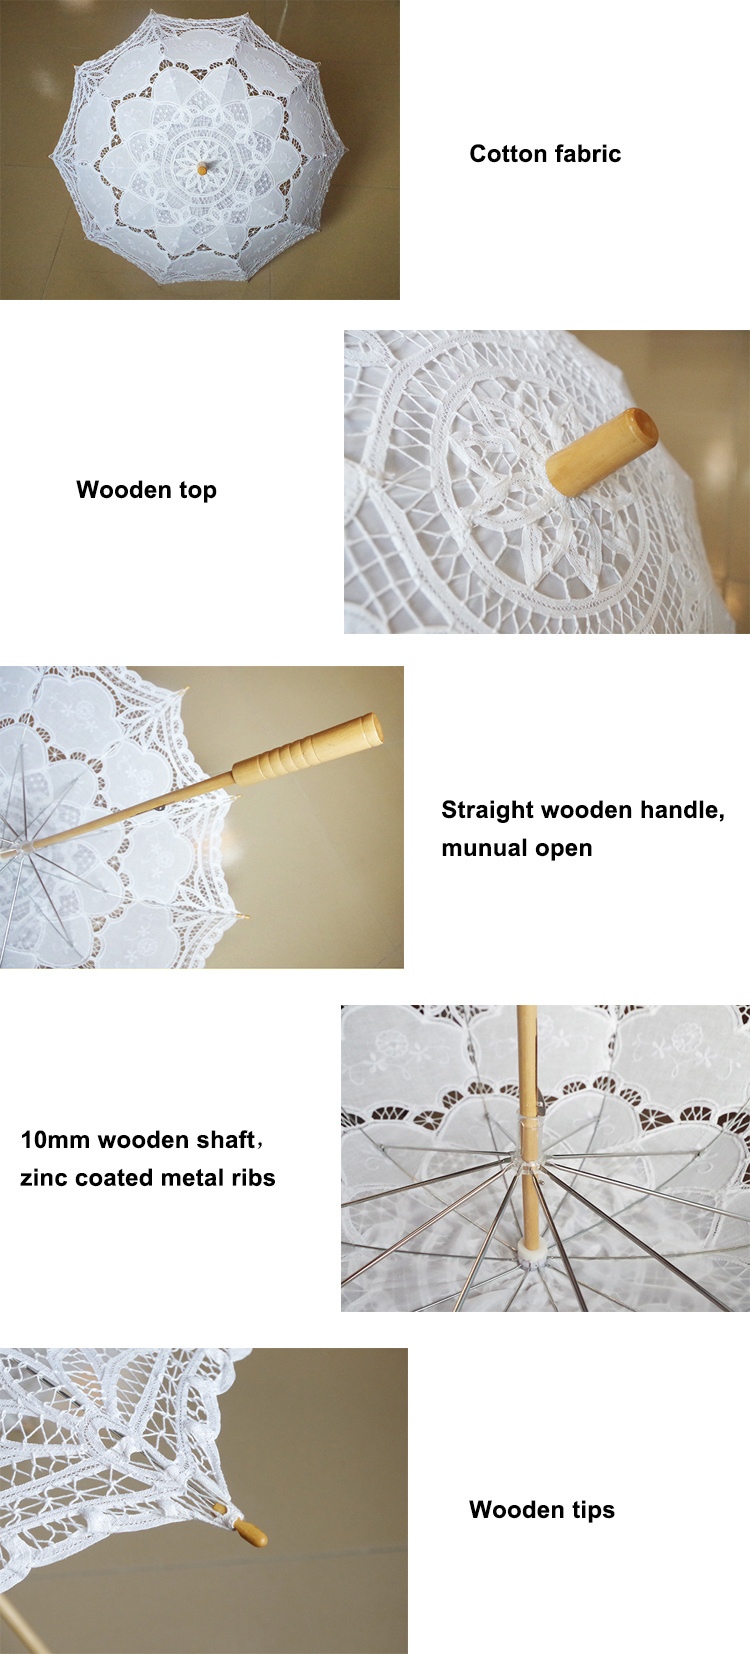 Wedding Gifts for Guests Custom White Parasol Cotton Umbrella